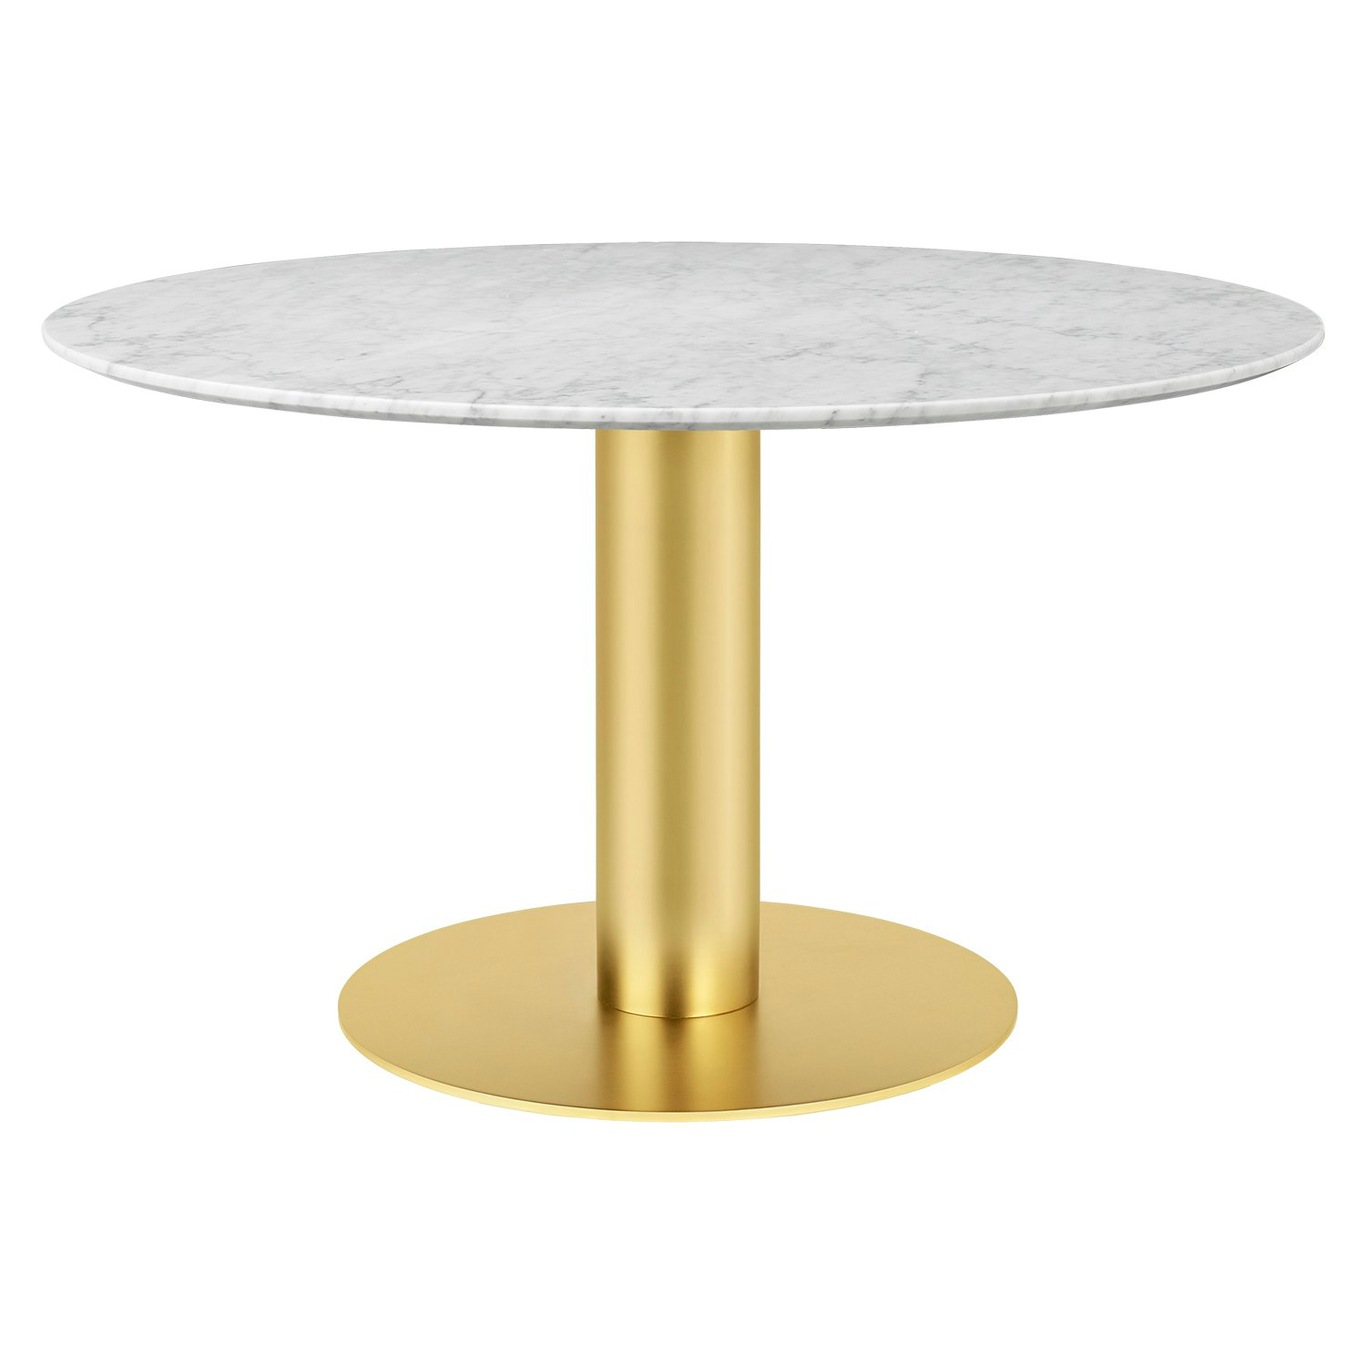 2.0 Dining Table, Brass/White Marble Ø130cm